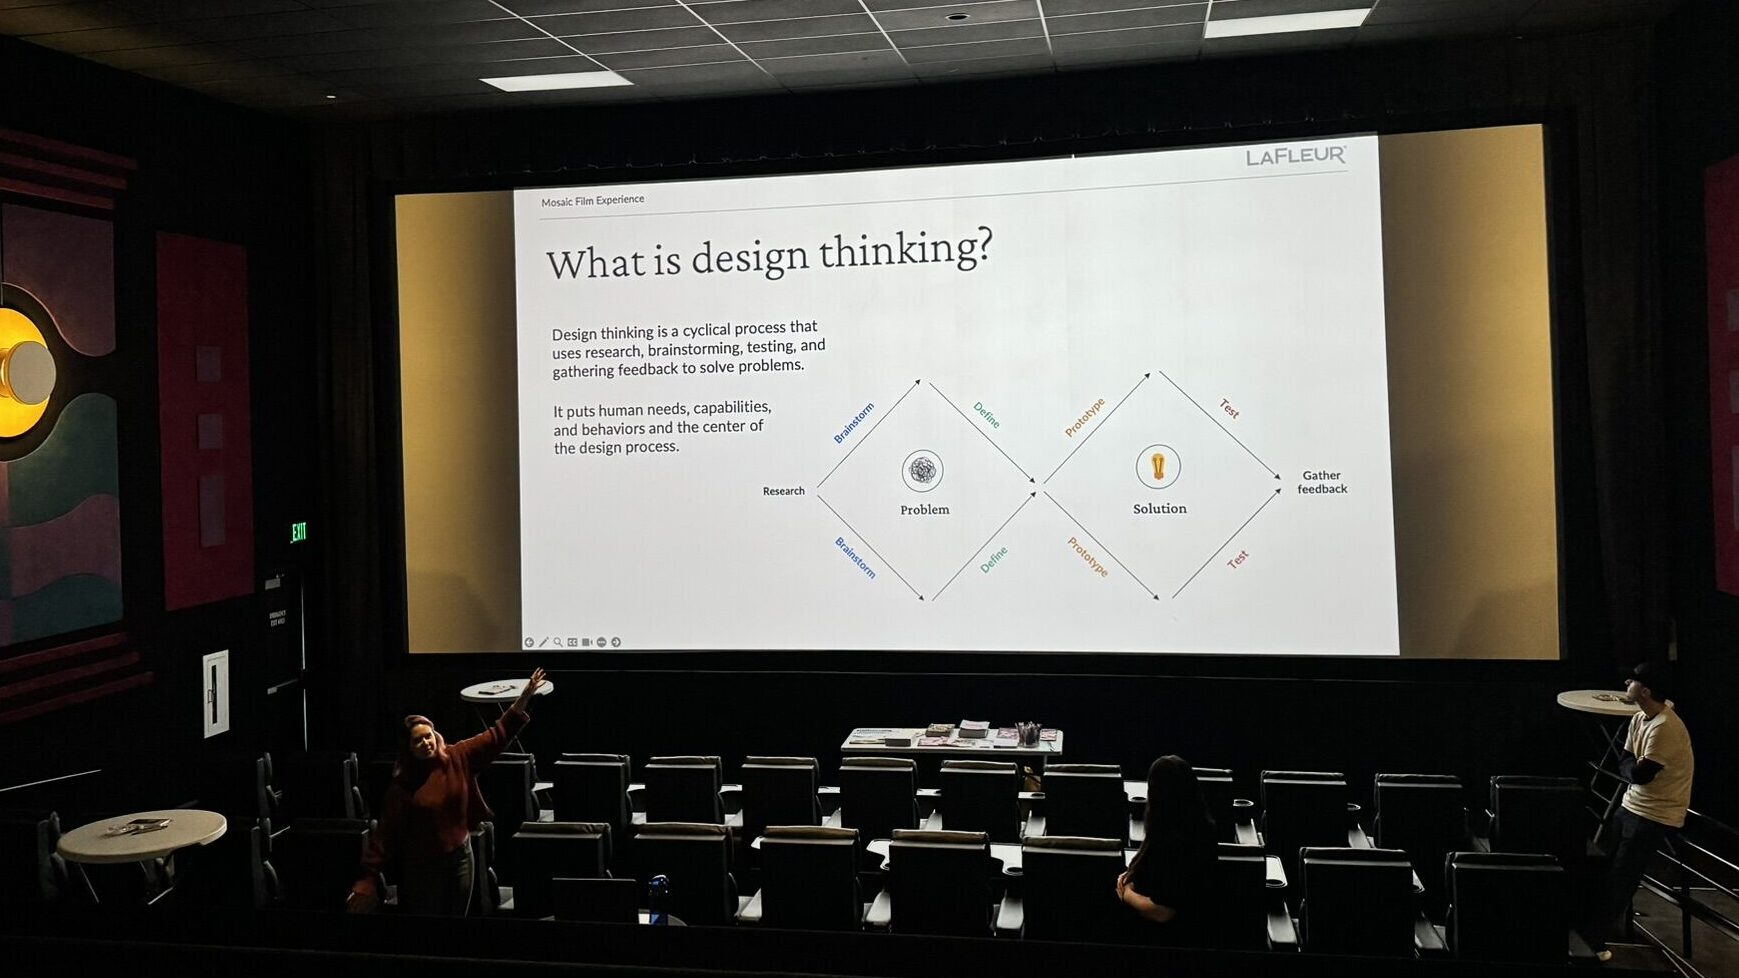 Presentation slide explaining design thinking, with people in a theatre setting.